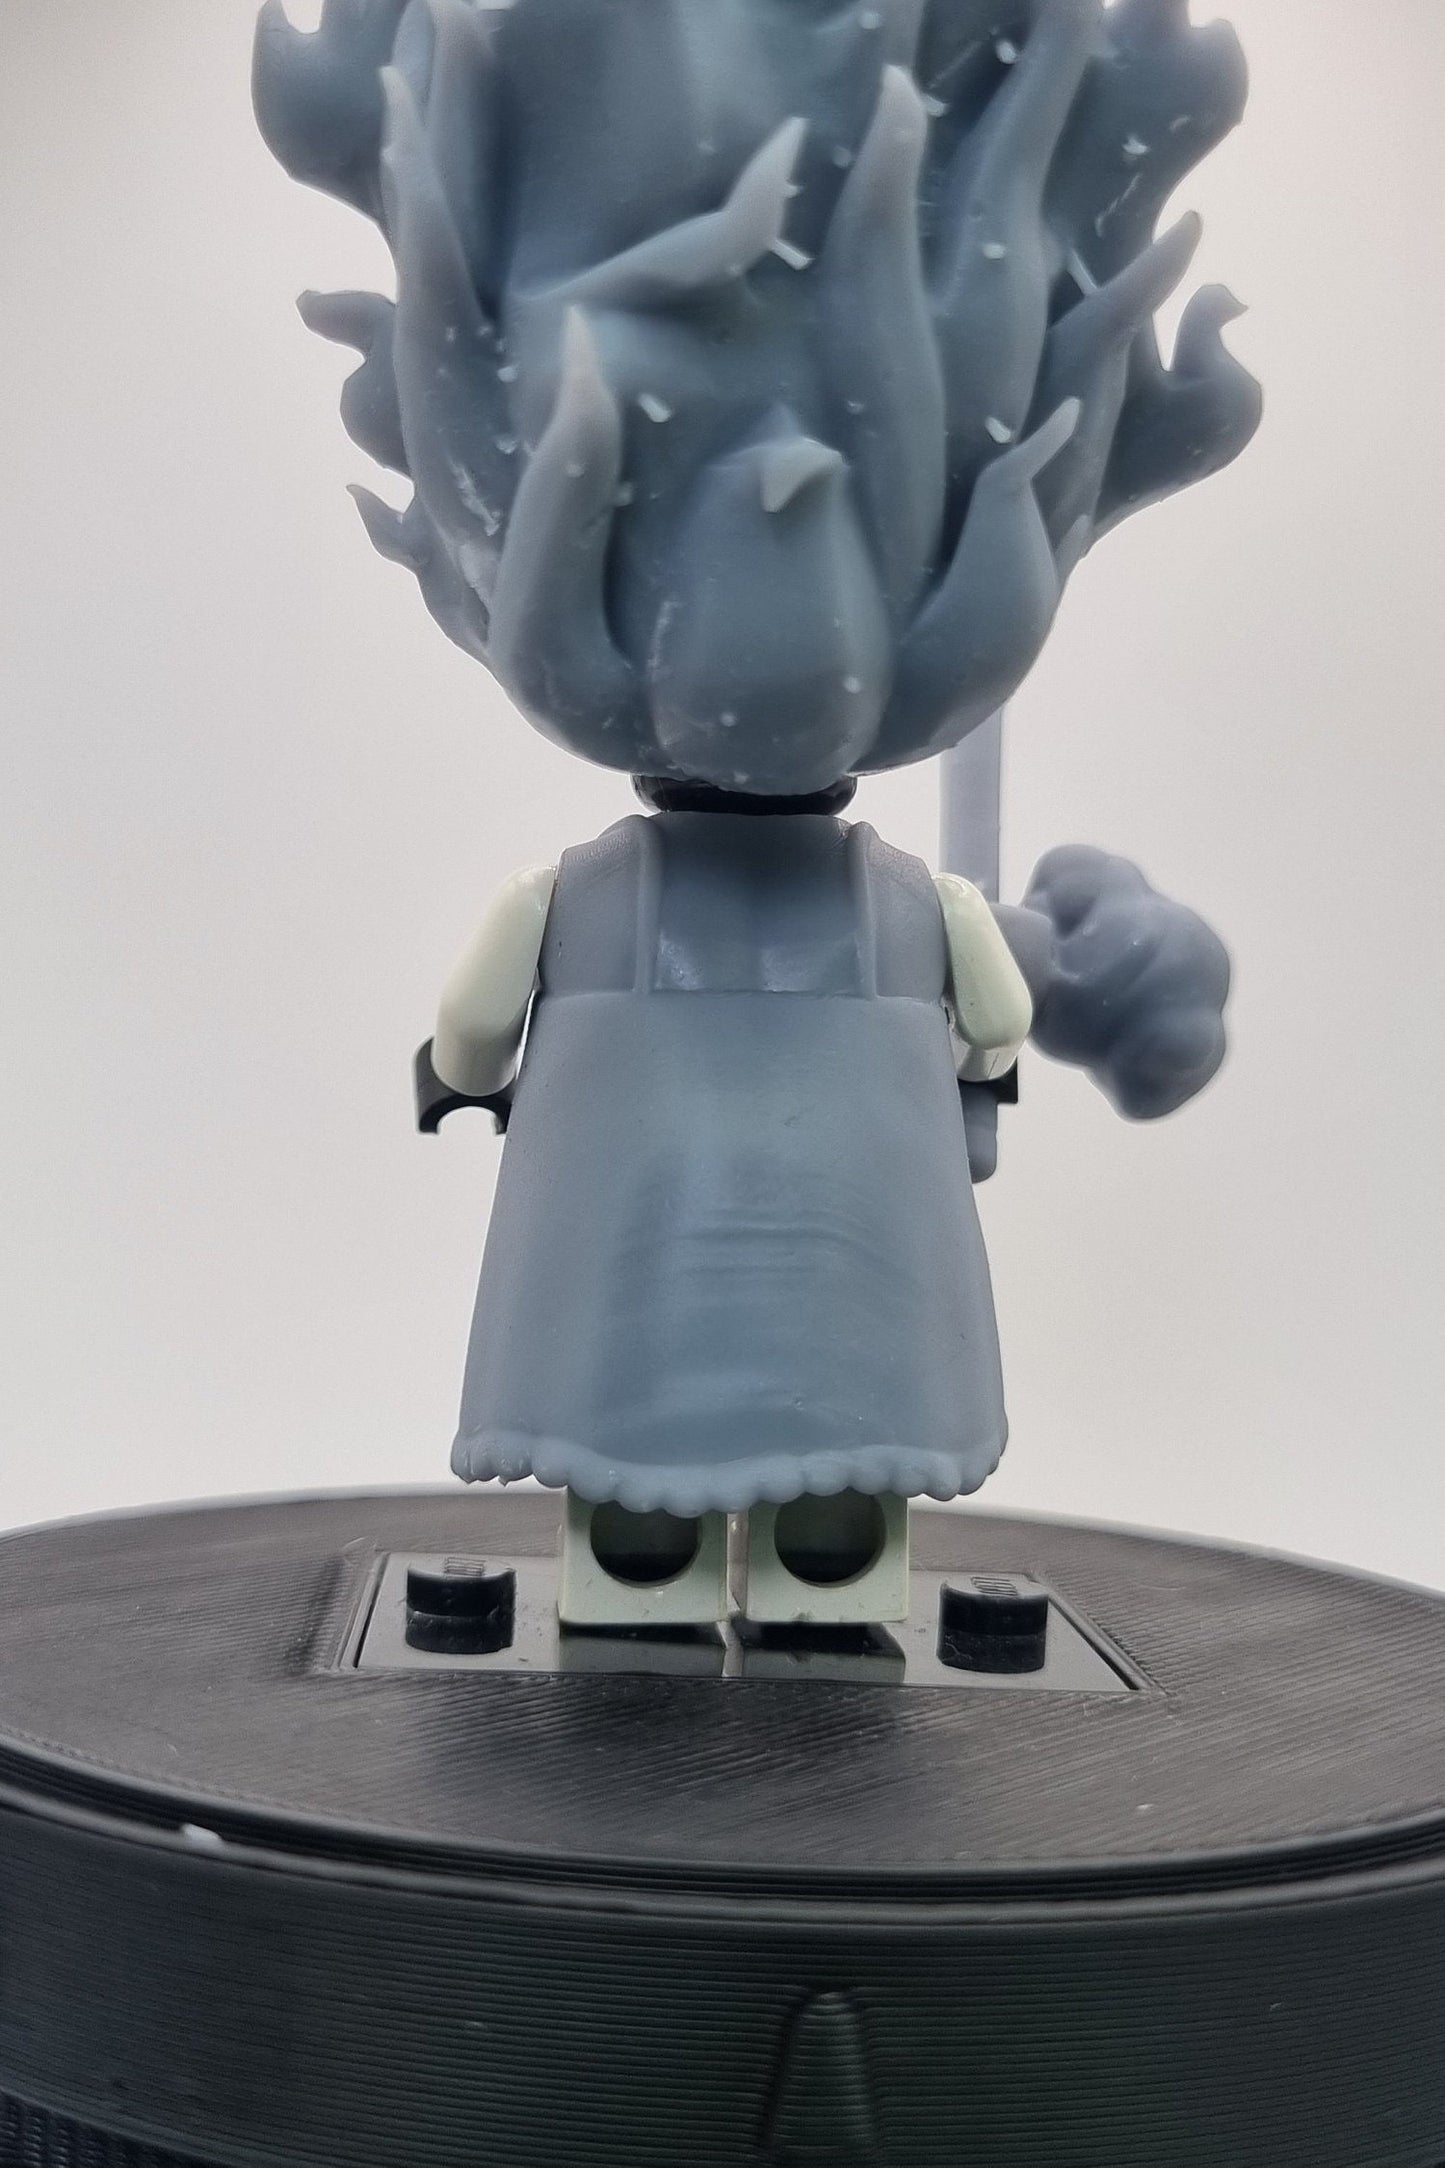 Building toy custom 3D printed momma pirate full set with all hairpieces!!!